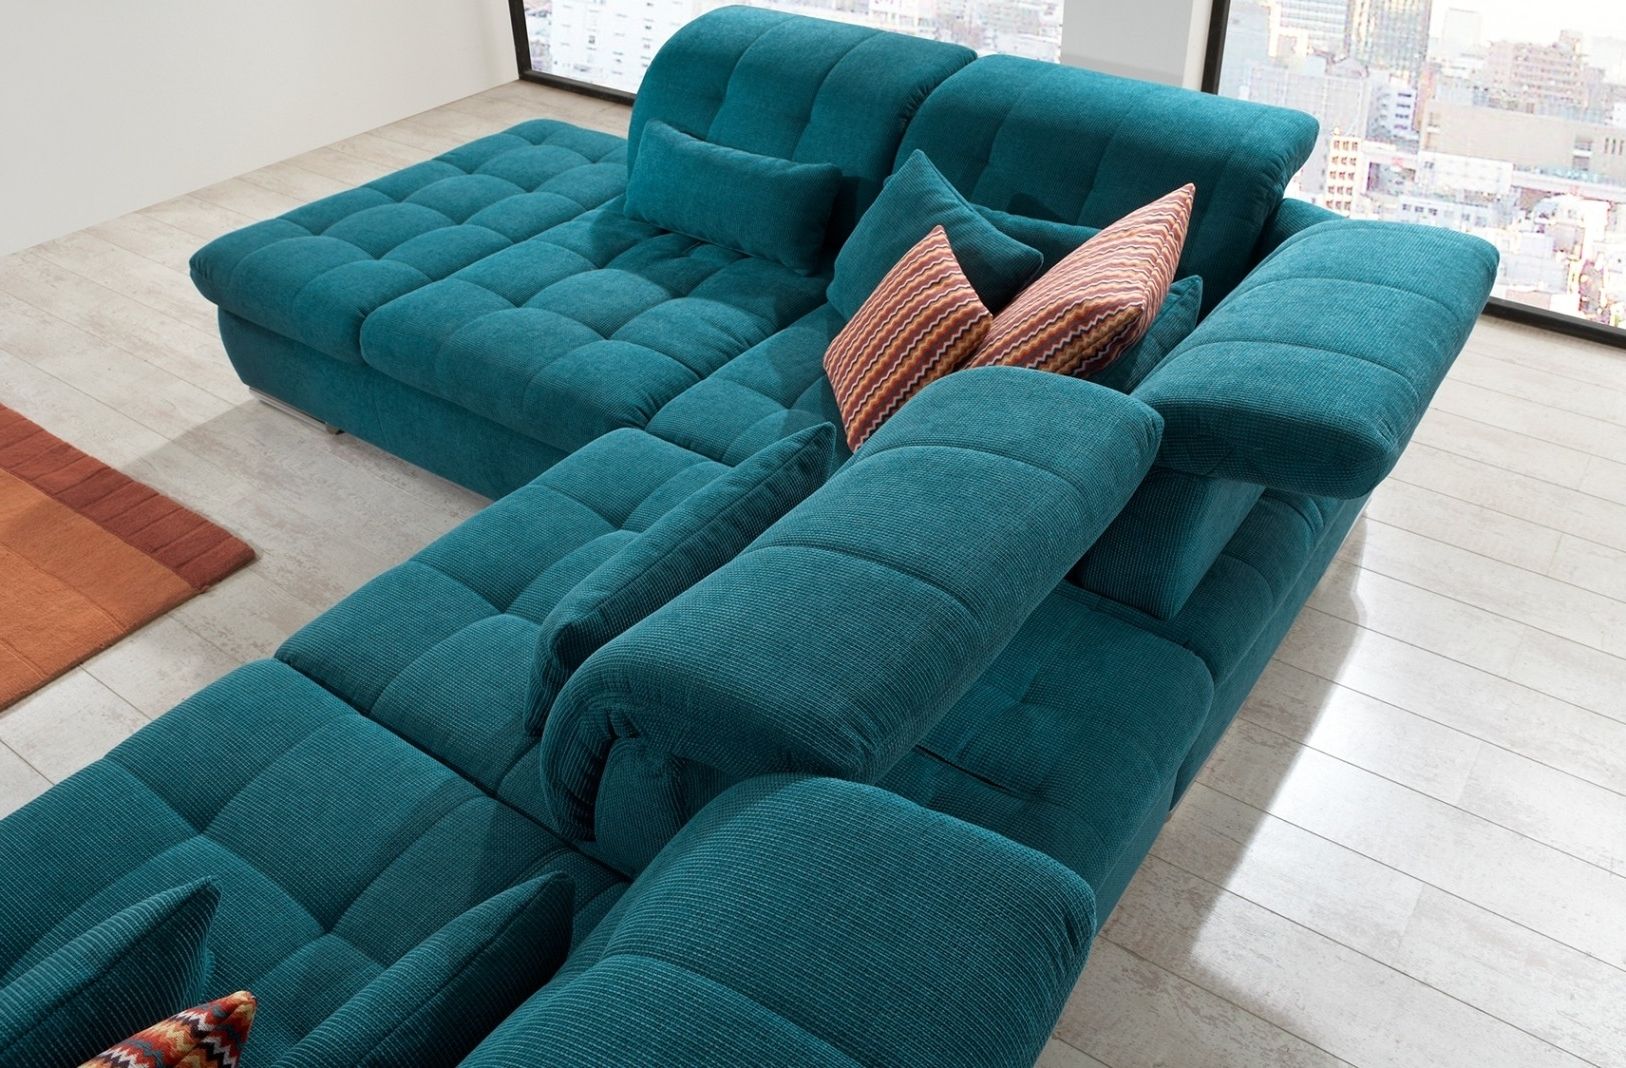 Alpine Sectional Sofa In Green Fabric In Most Recent Green Sectional Sofas (View 11 of 20)